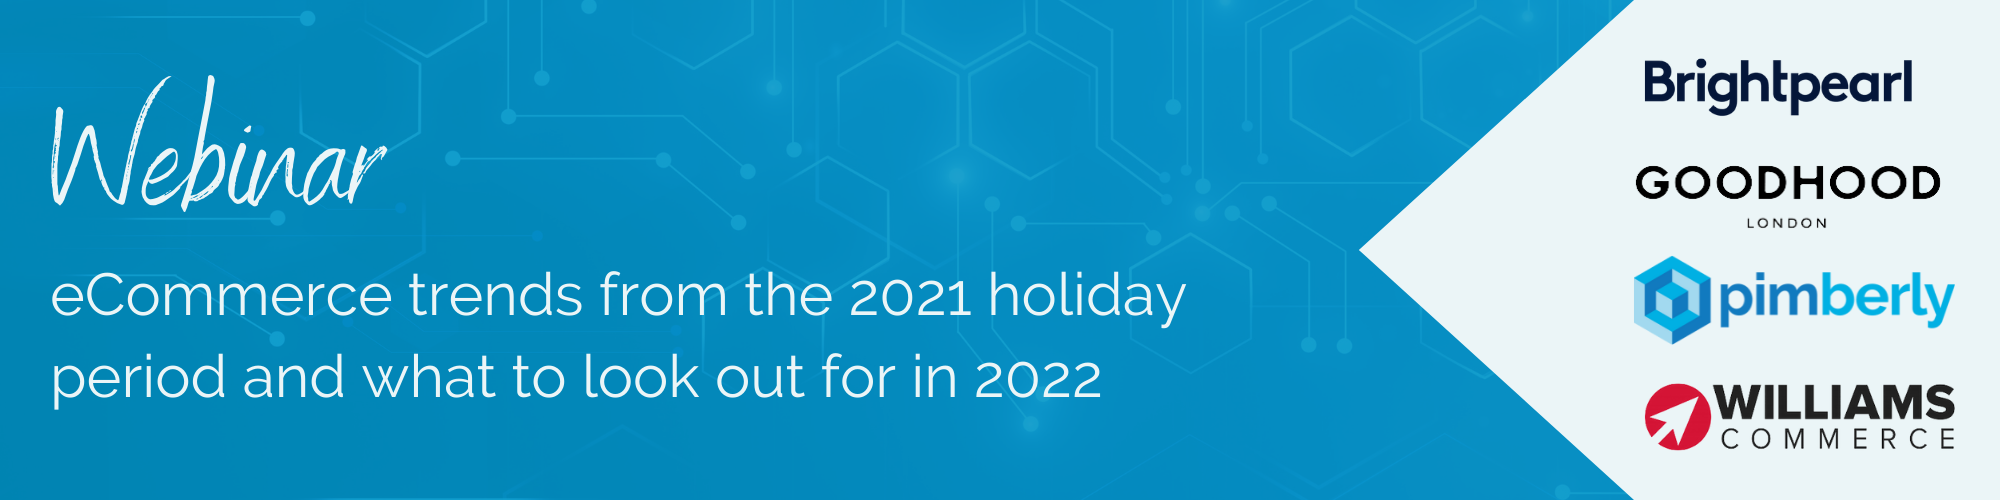 Webinar: eCommerce trends from the 2021 holiday period and what to look out for in 2022